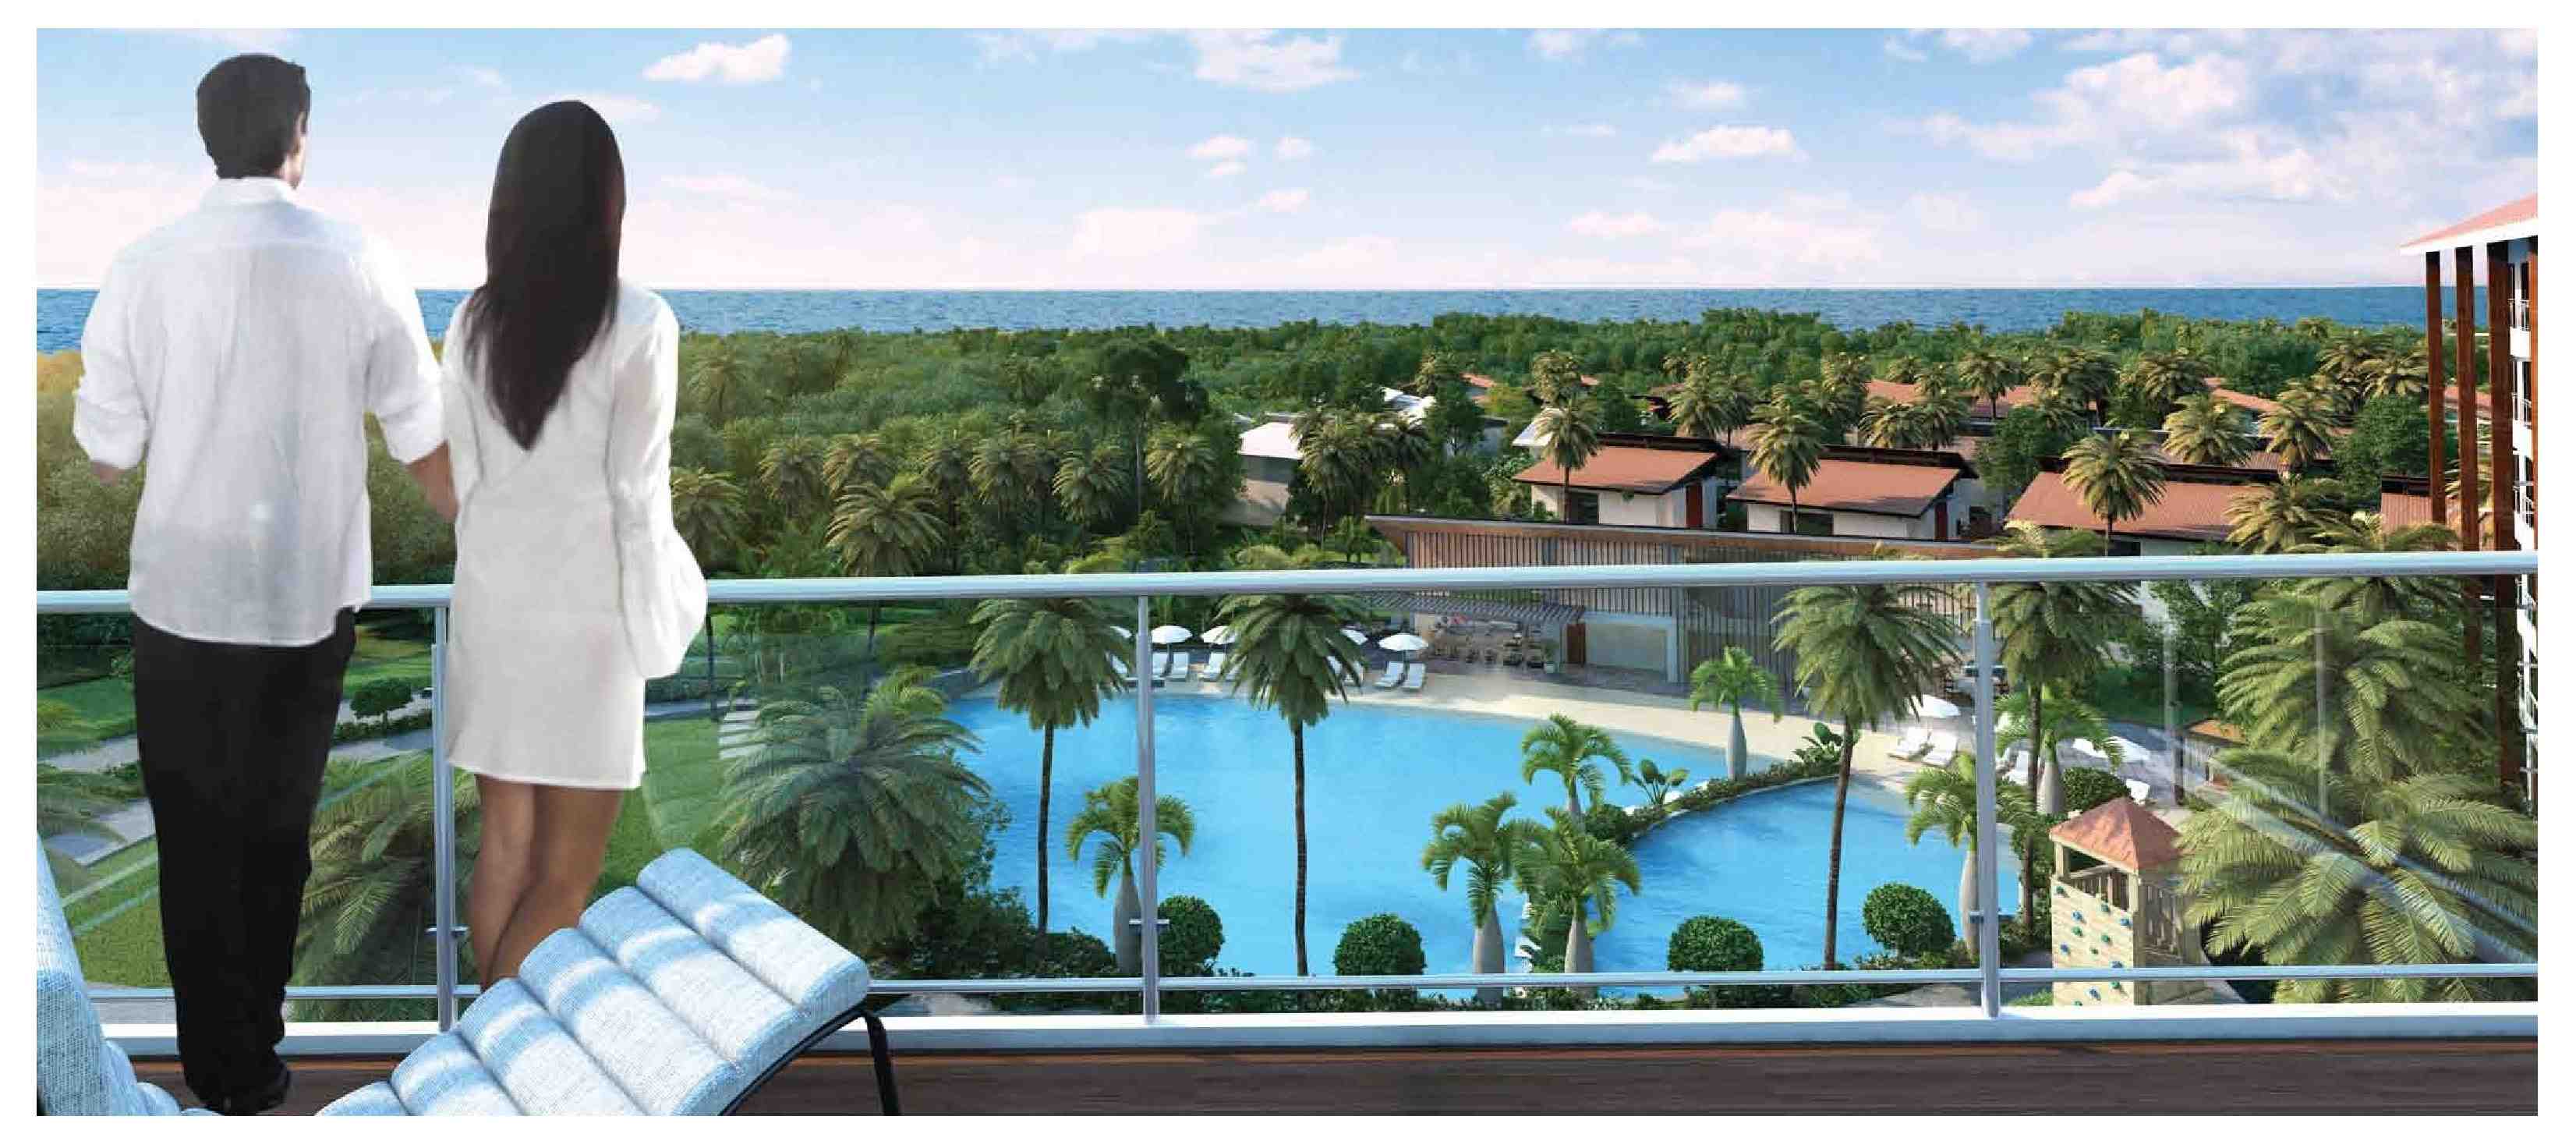 Enjoy the mesmerizing view of the natural forest by residing at Zuari Rain Forest in Goa Update